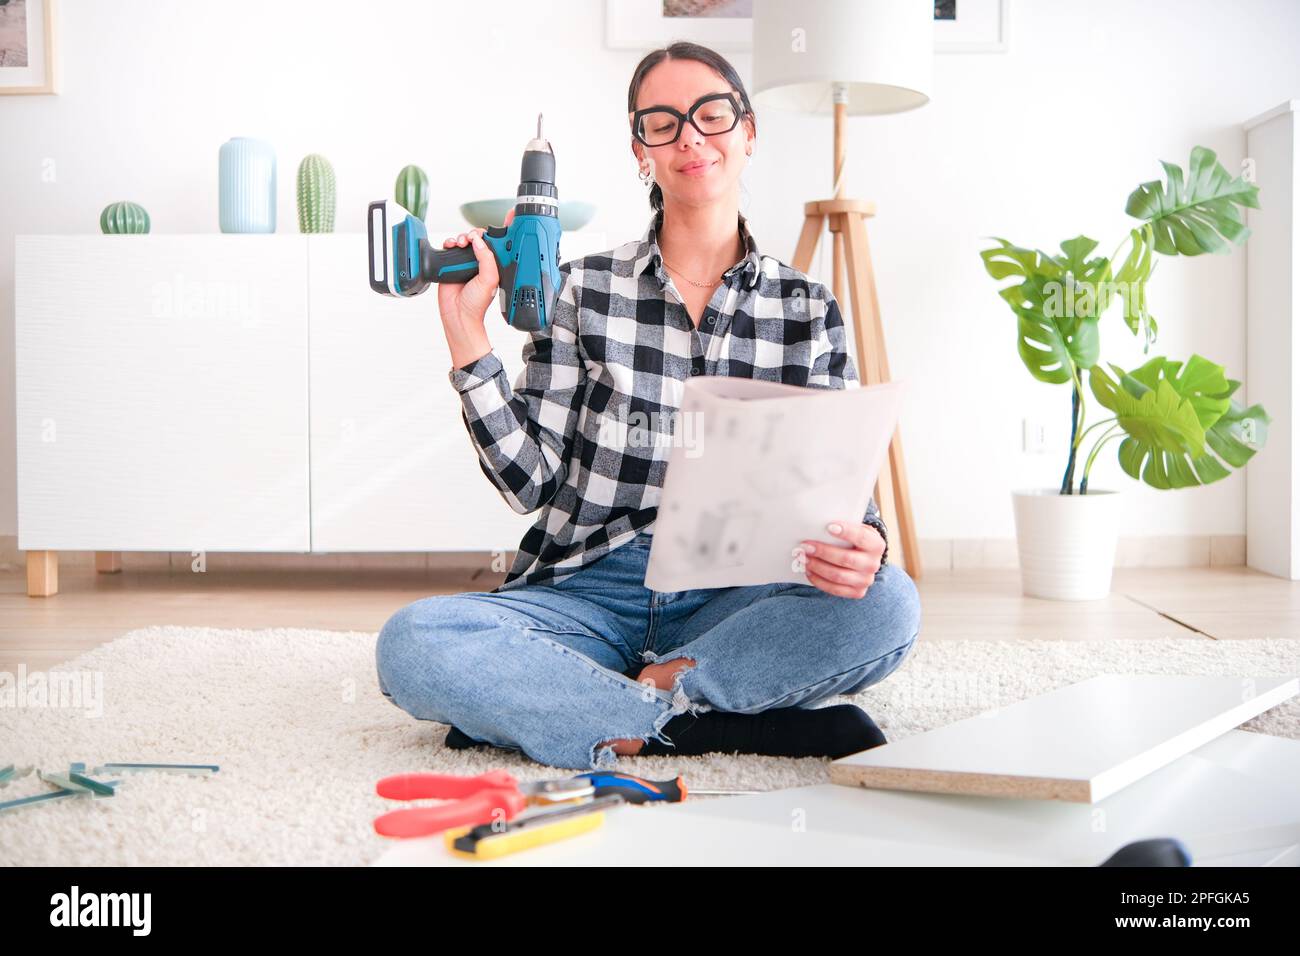 Woman who is assembling furniture in her home as part of a renovation project. She is using a variety of tools Stock Photo